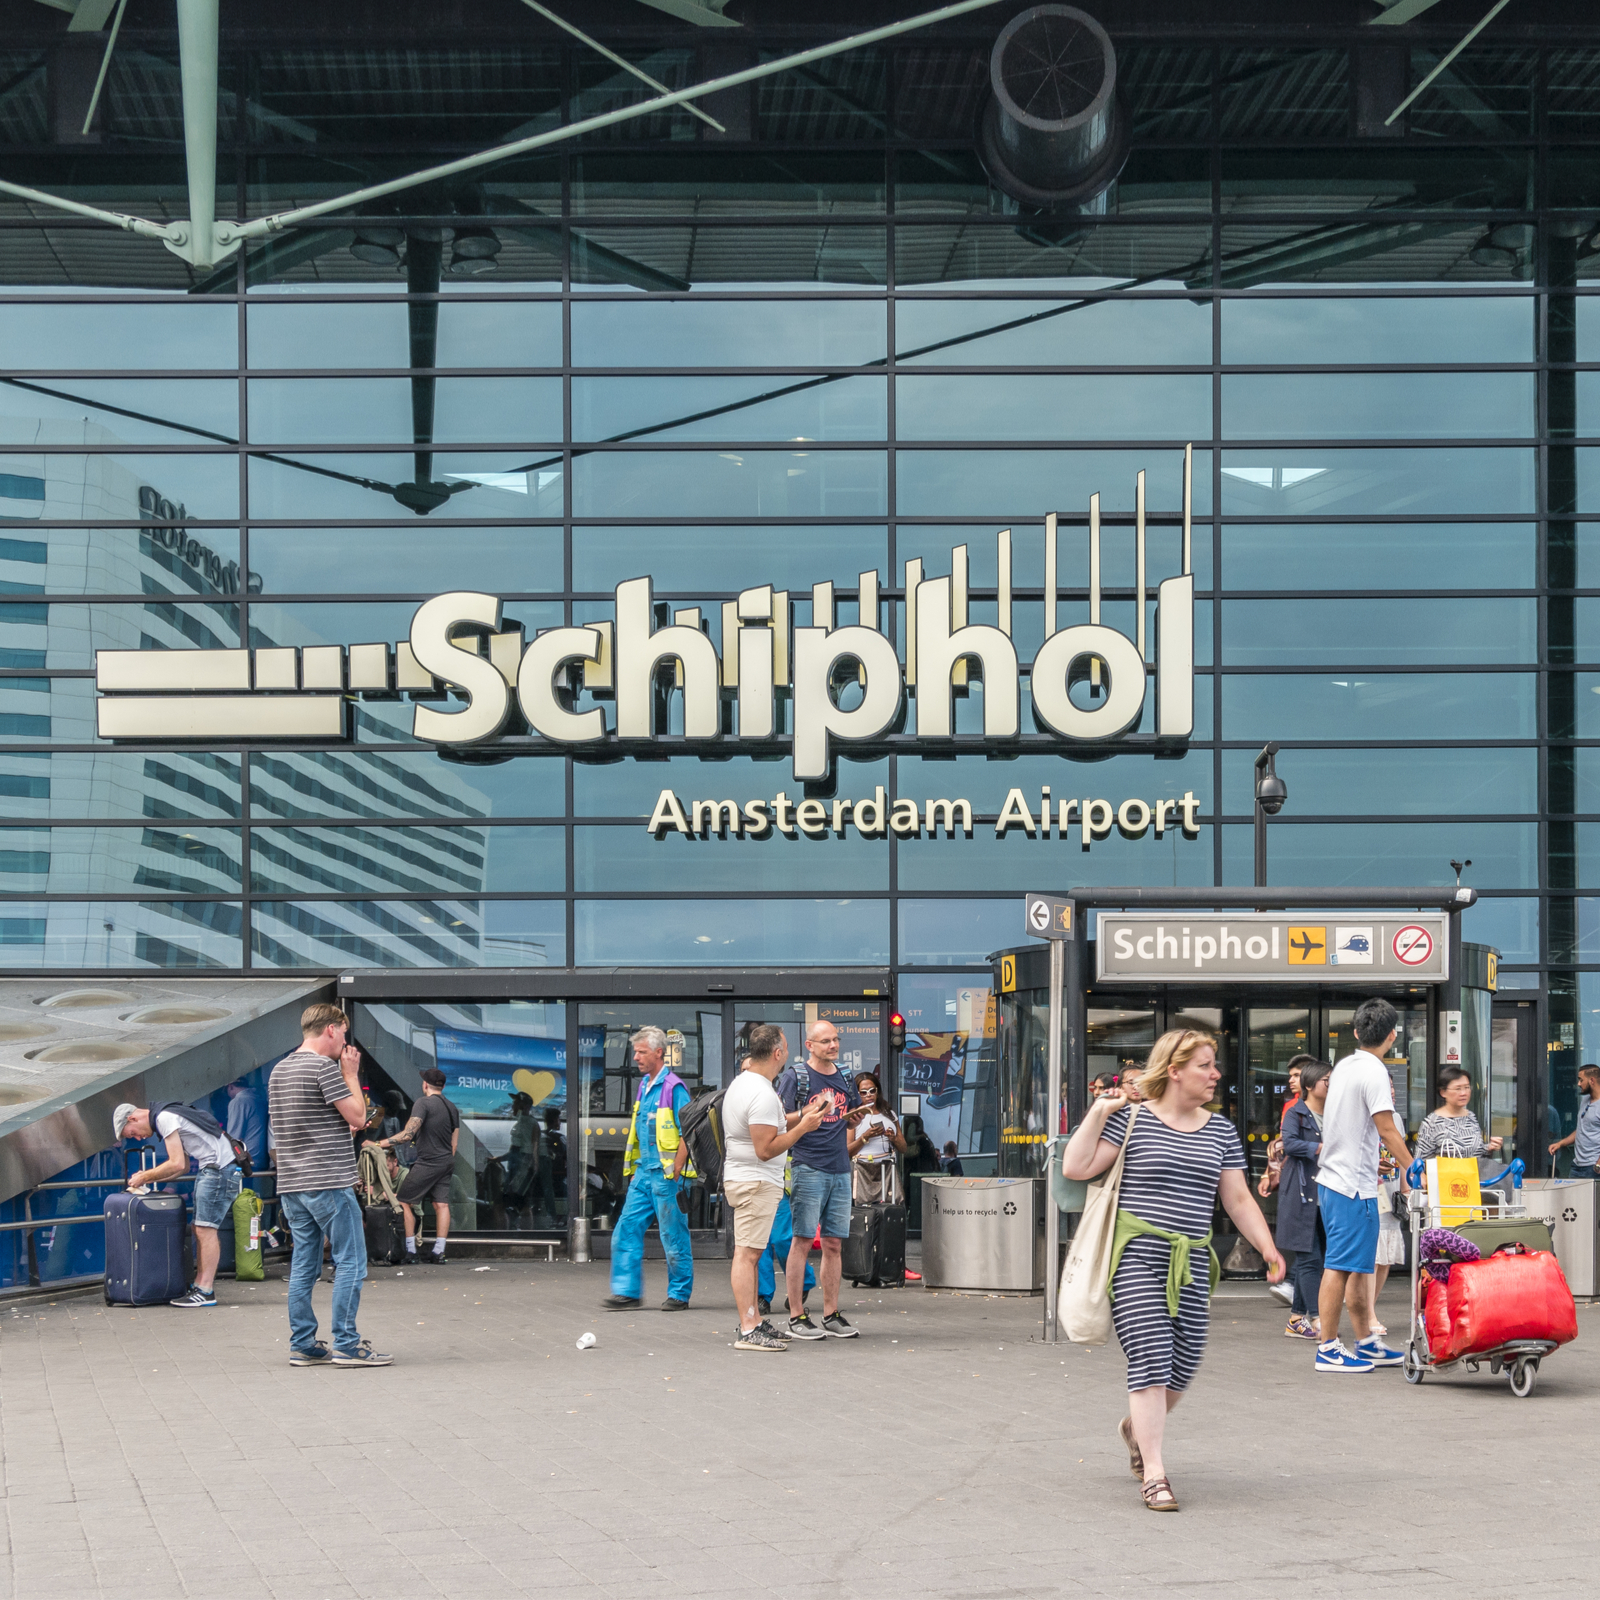 You Can Now Exchange Your Leftover Euros for Crypto at Schiphol Airport